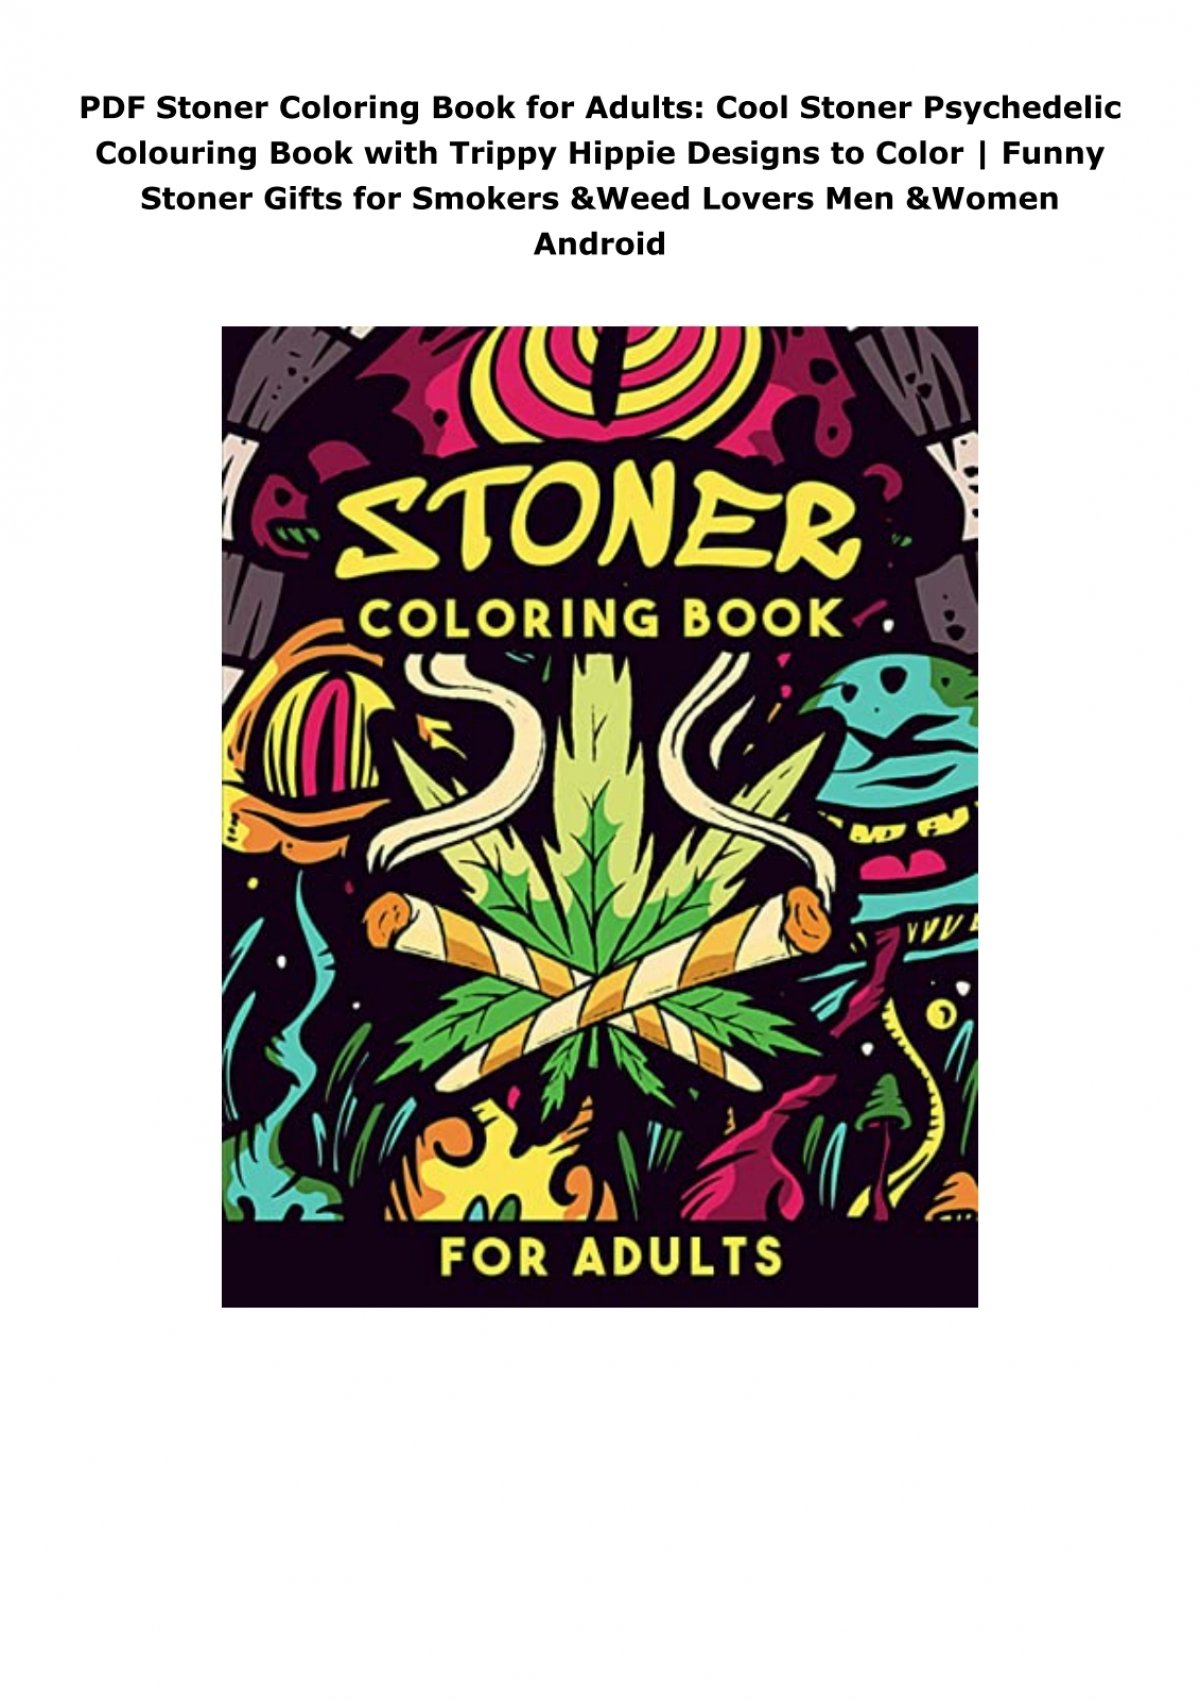 The Trippy Hippie Coloring Book - The Stress Relieving Coloring Book For Adults [Book]